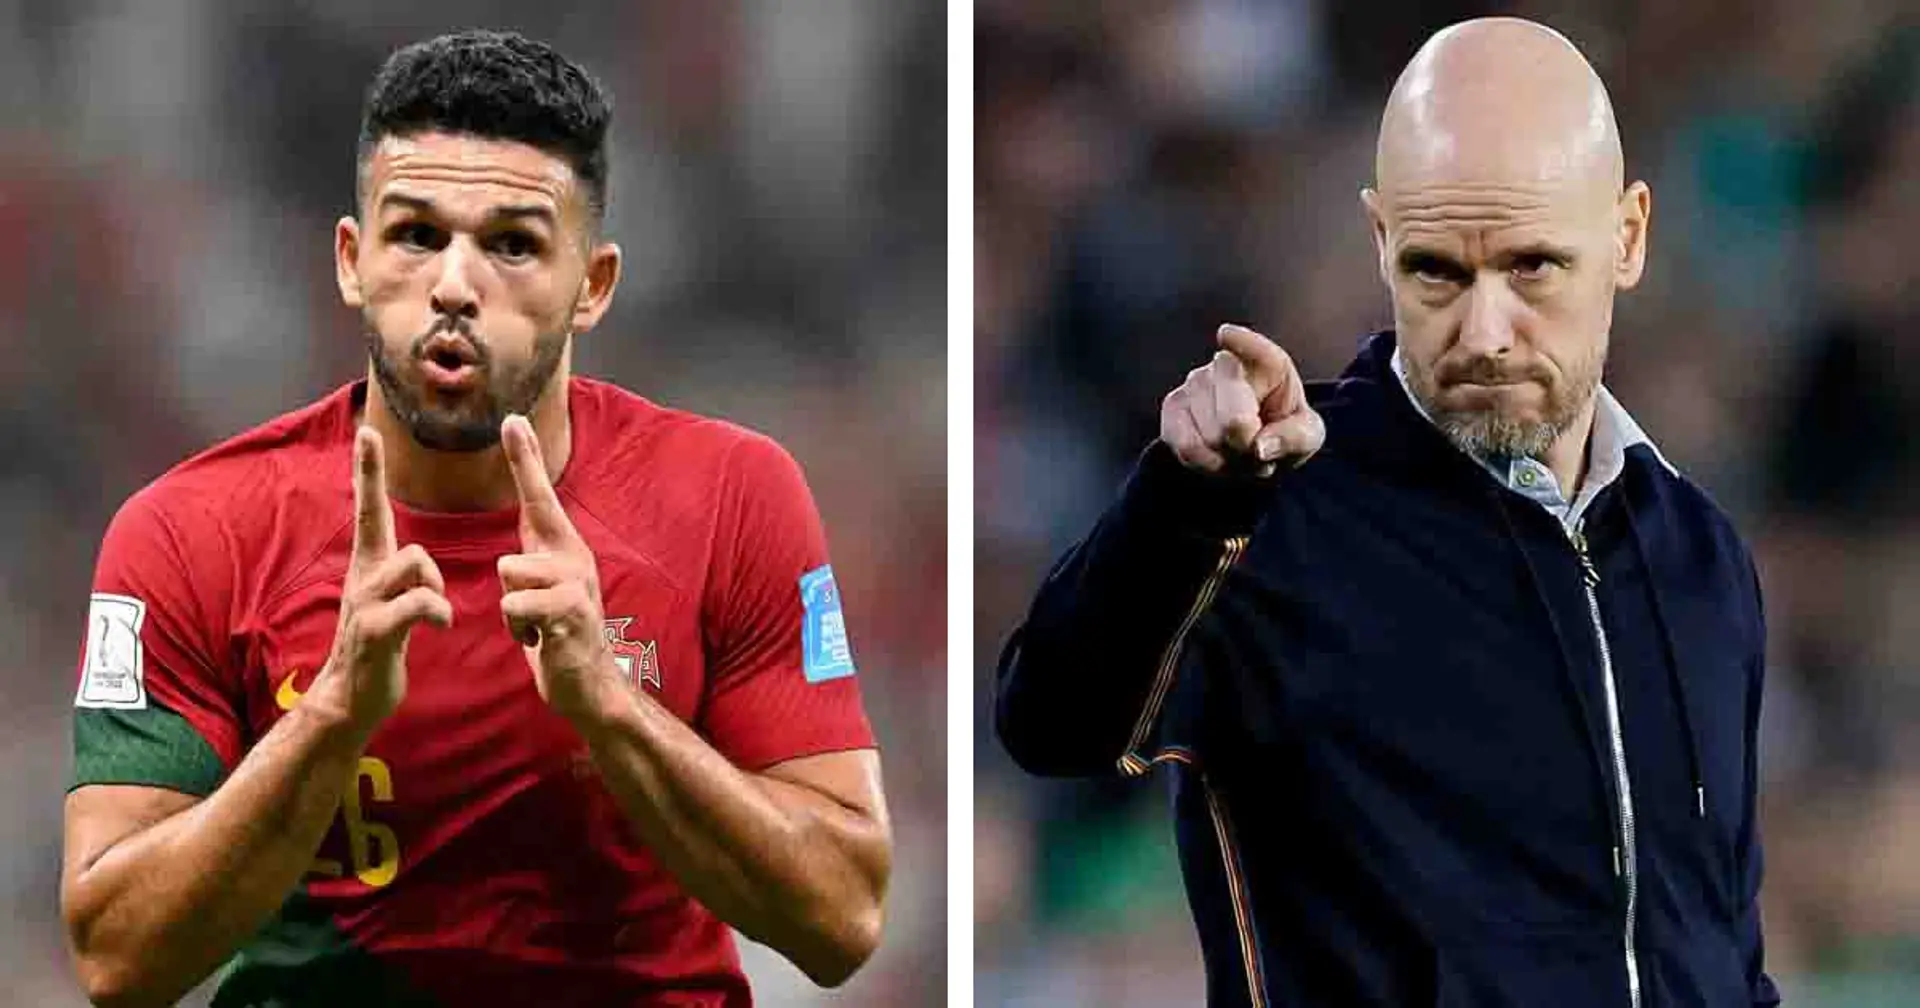 Ten Hag 'gives green light' for United to pursue Goncalo Ramos signing (reliability: 3 stars)